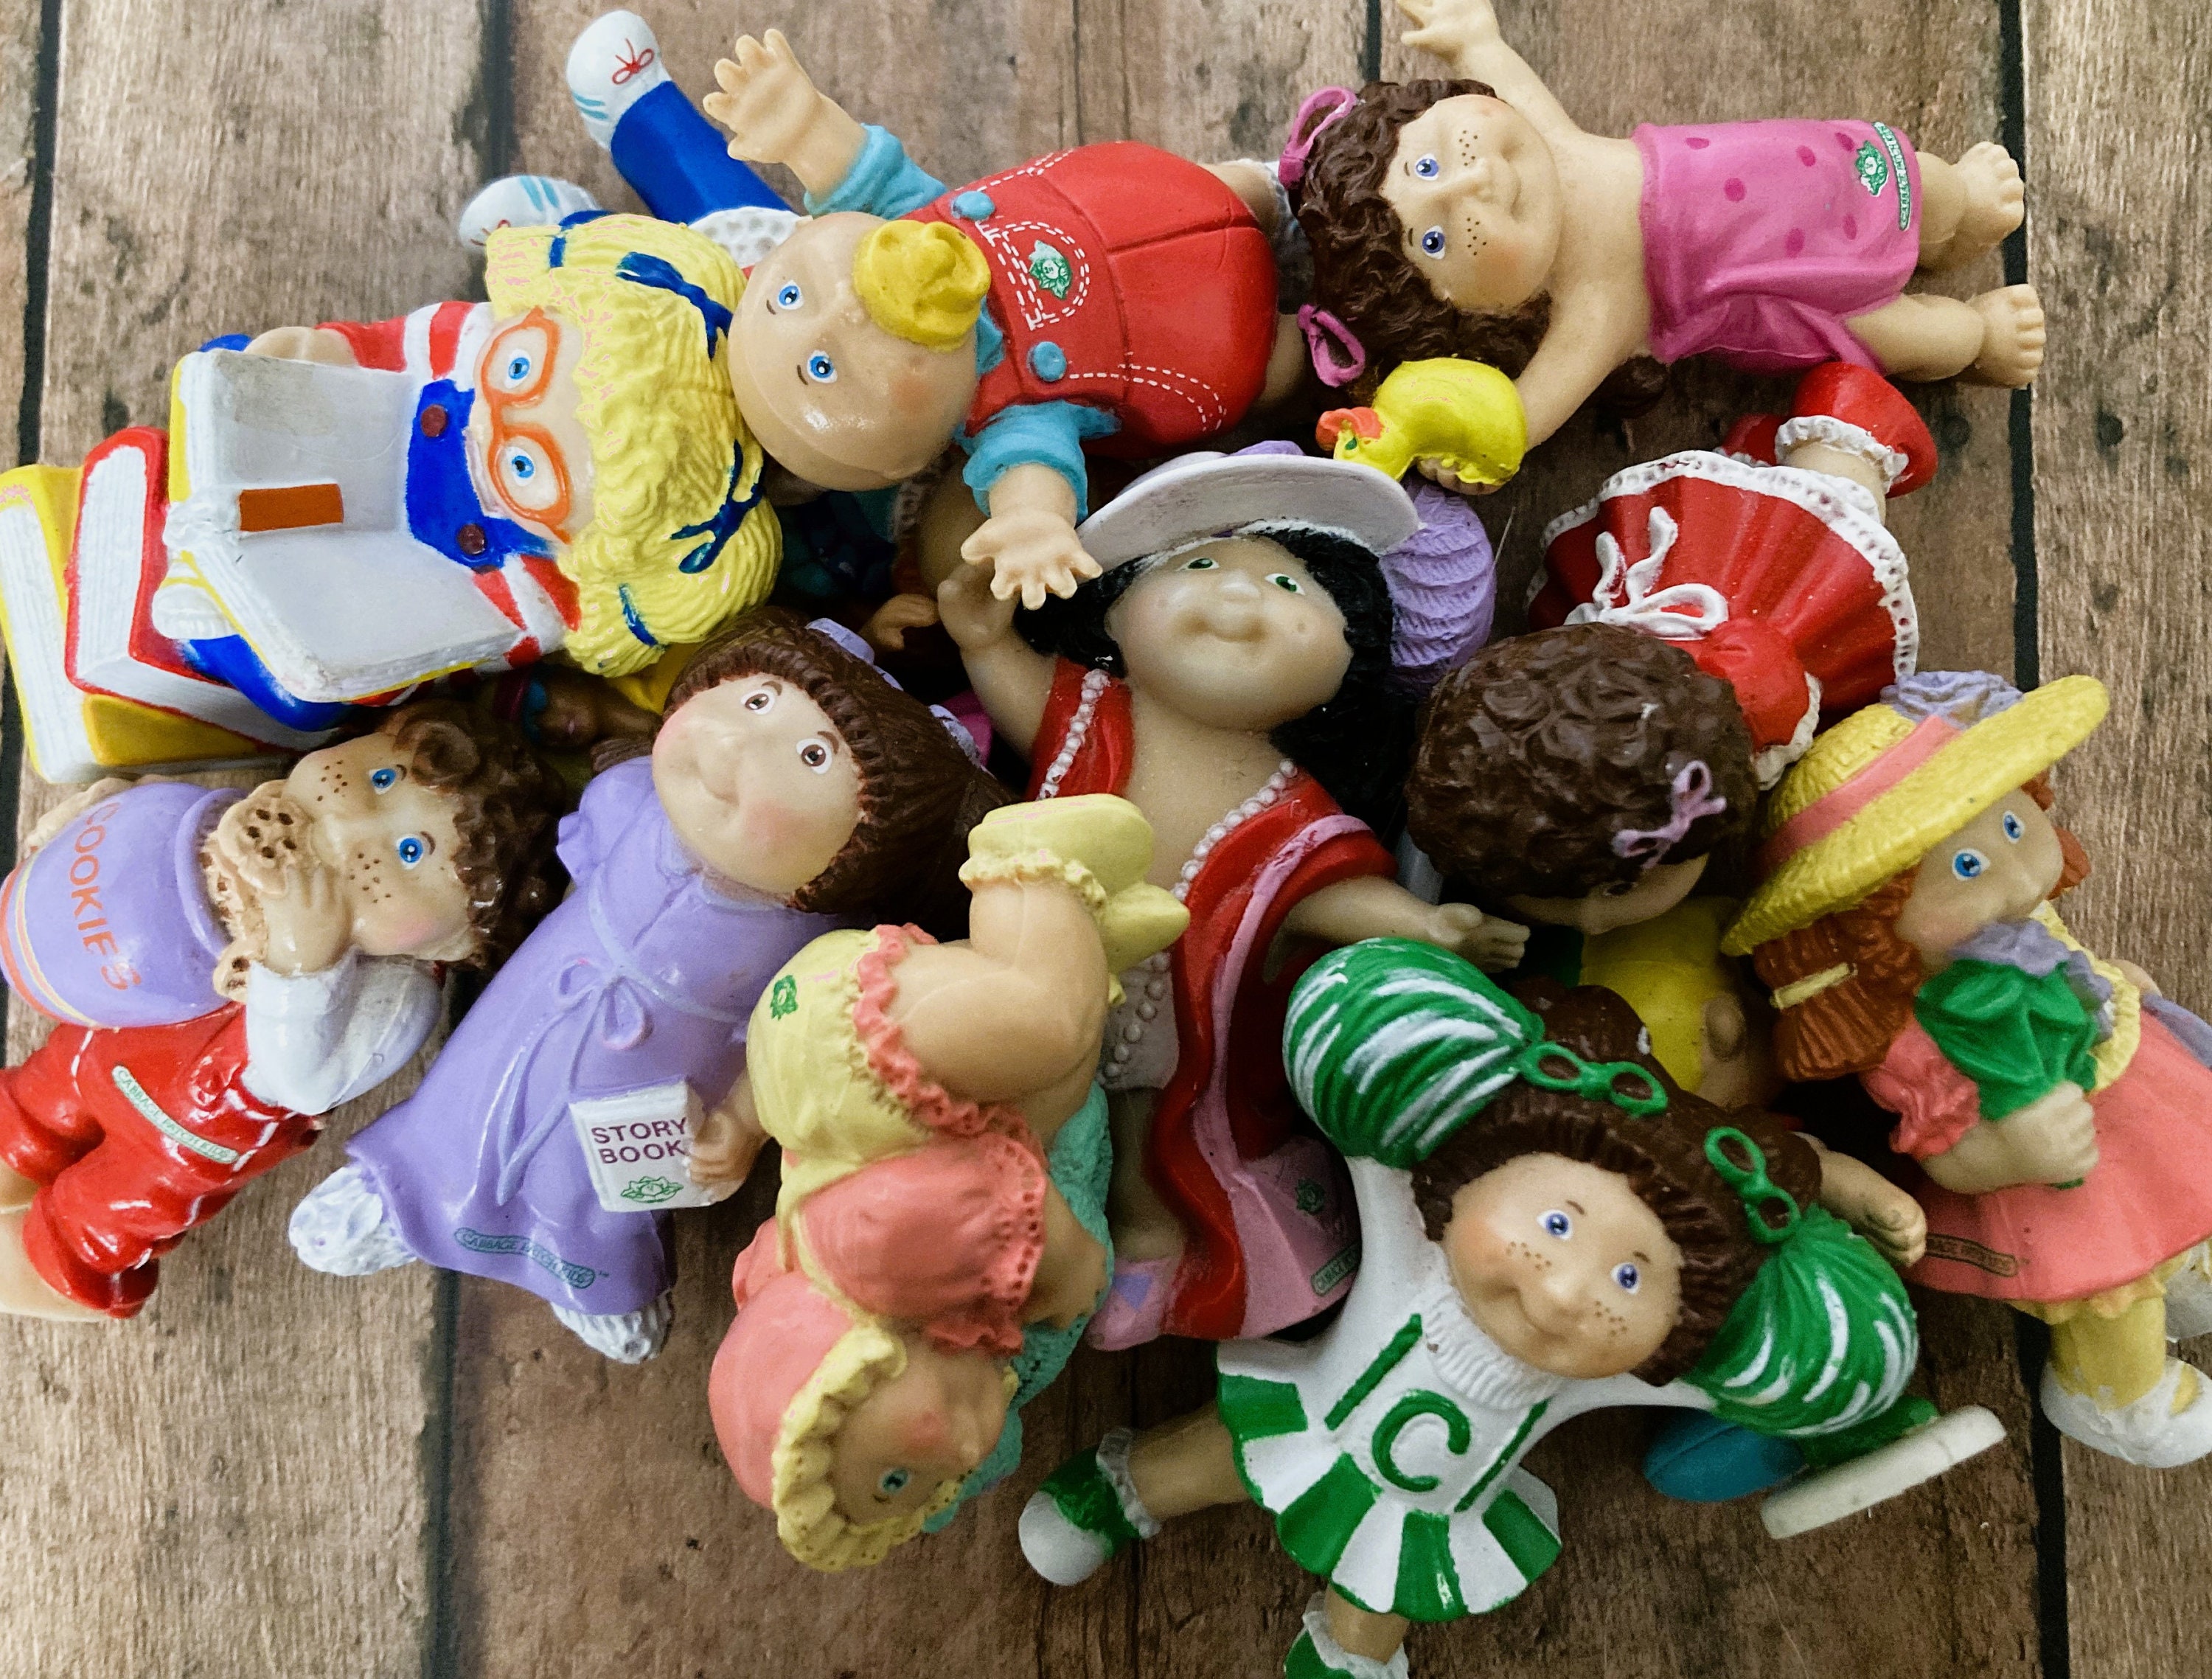 Vintage Cabbage Patch Kids Pencils. Sold Separately 